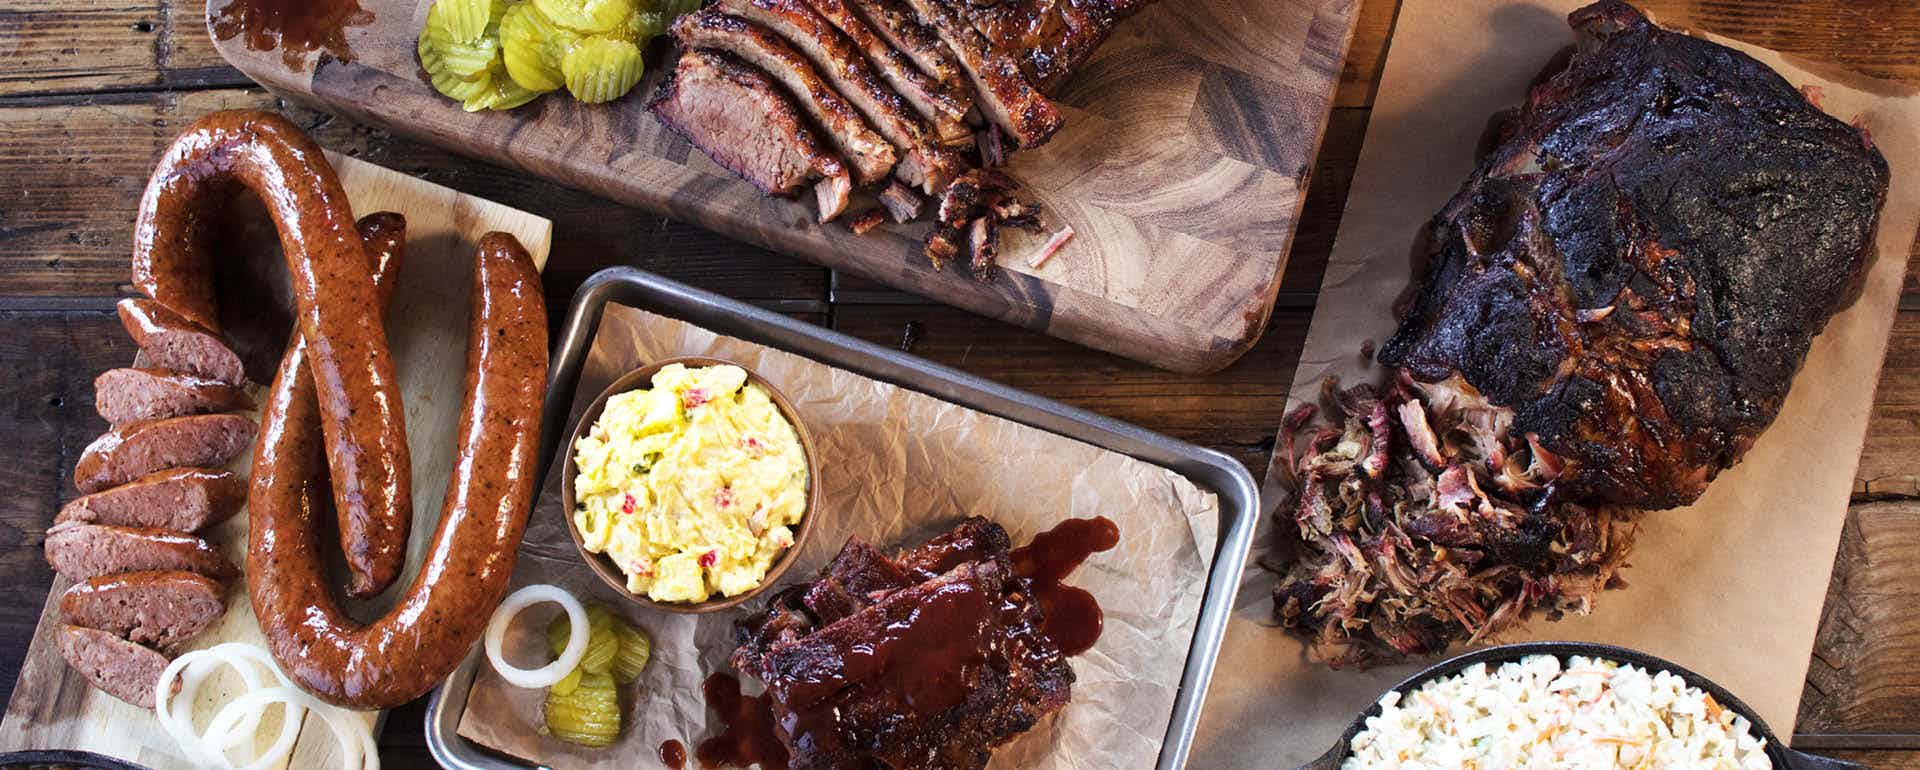 Local Restauranteur Opens New Dickey’s Barbecue Pit Location in Porter